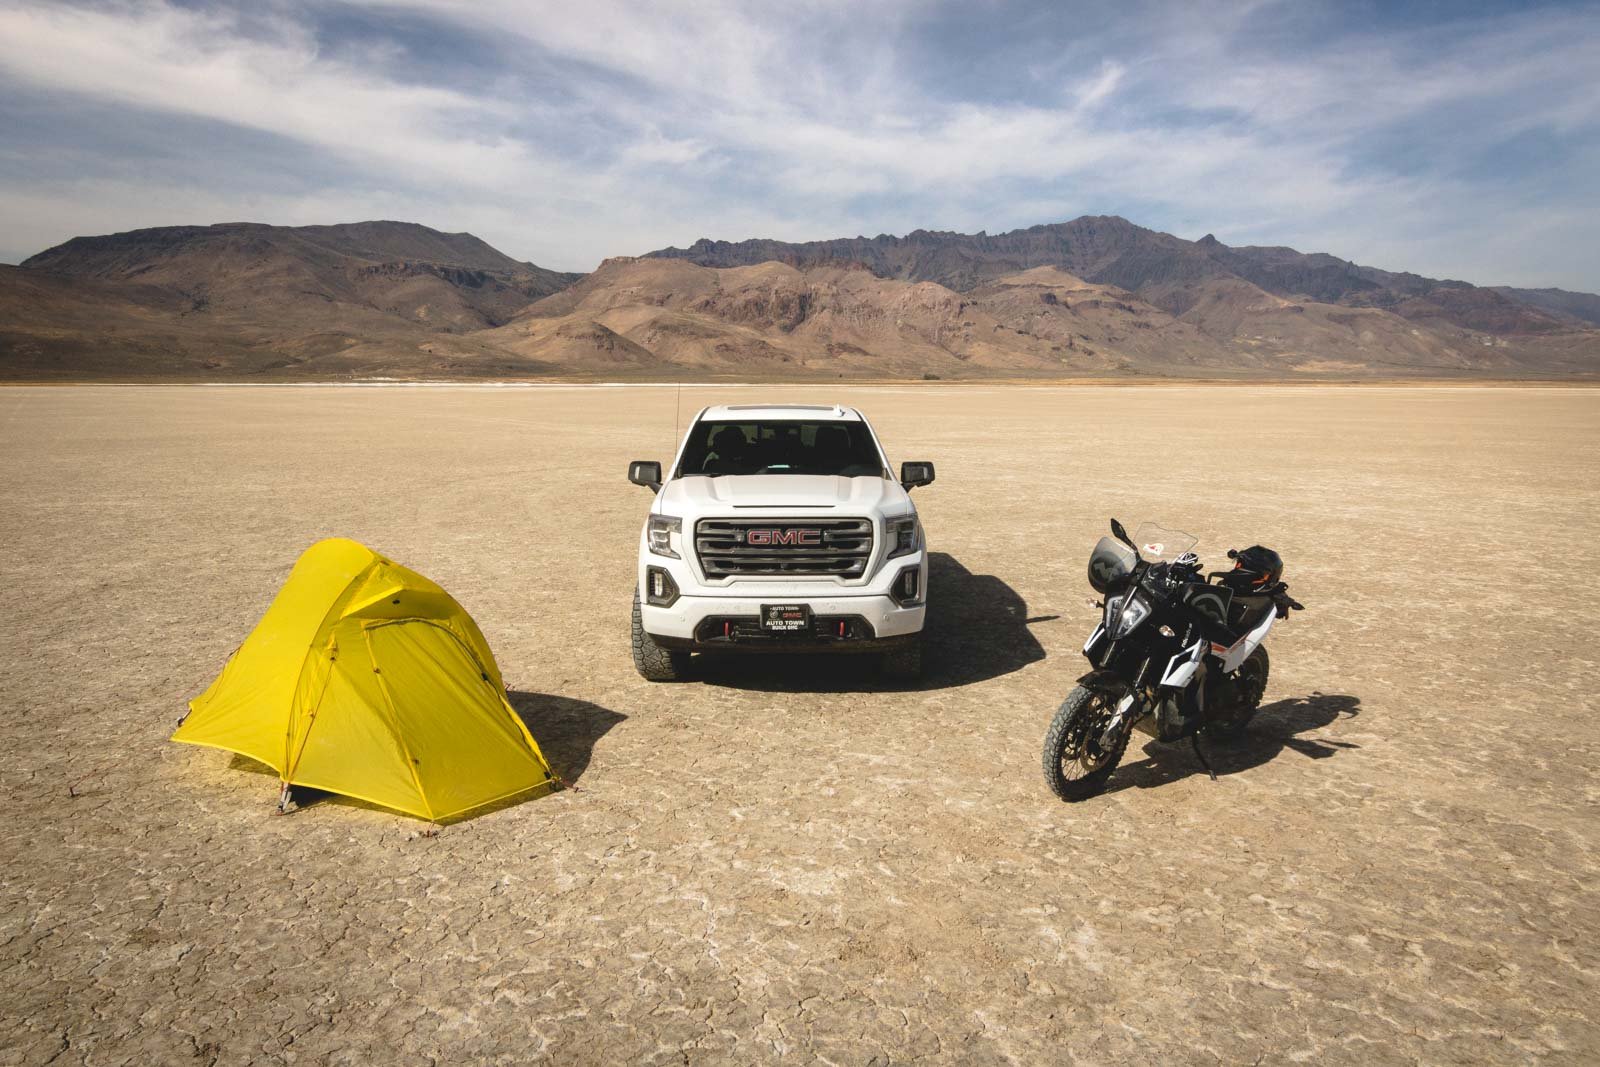 Camping out at  Alvord Desert with the new KTM 790 Adventure